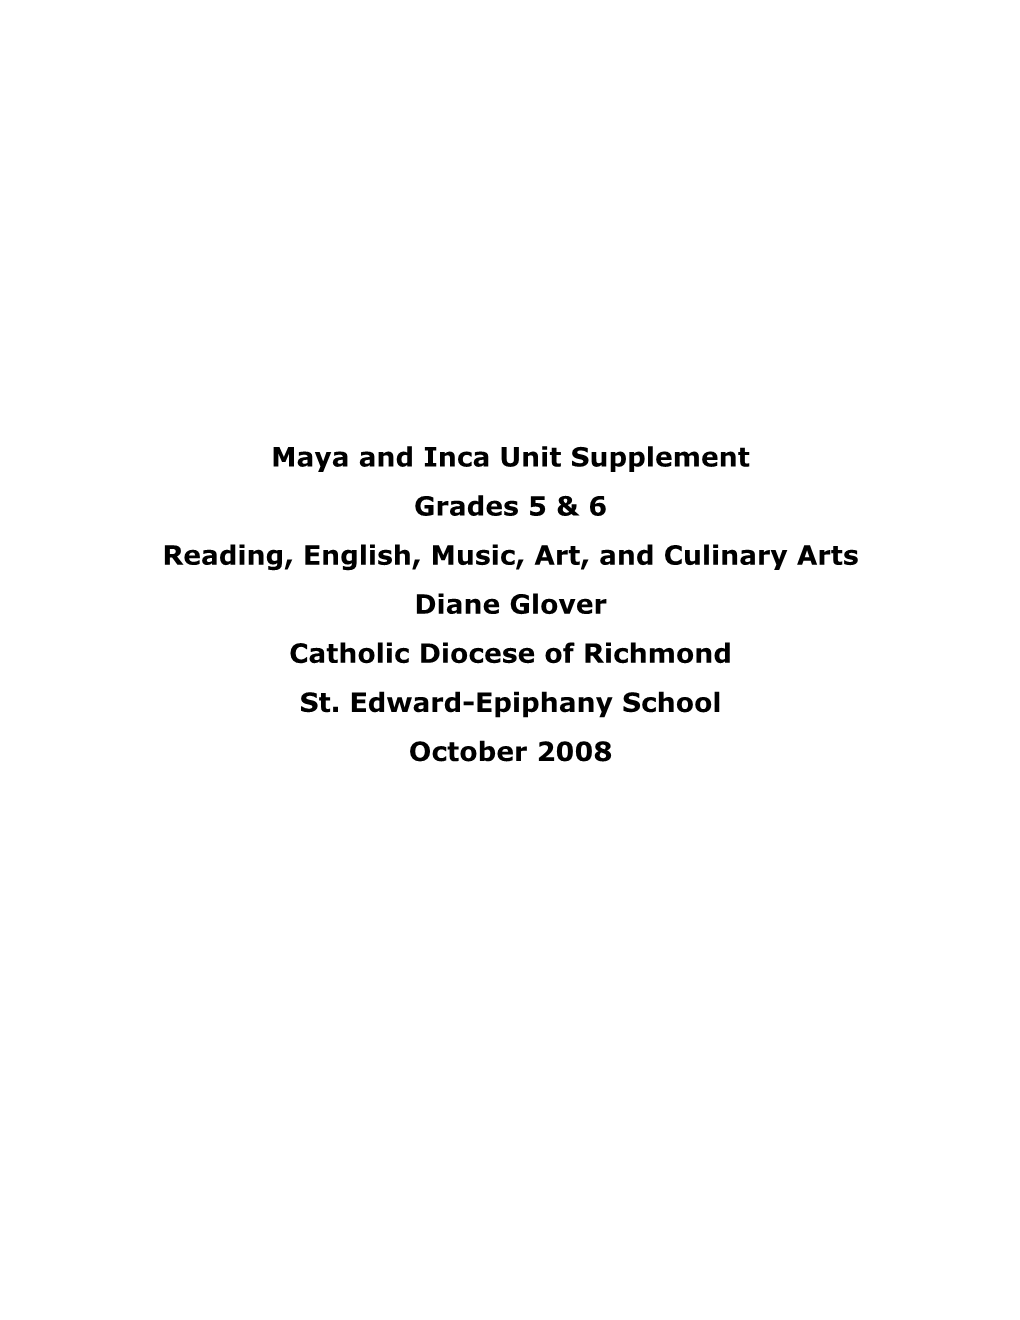 Maya and Inca Unit Supplement Grades 5 & 6 Reading, English, Music, Art, and Culinary Arts Diane Glover Catholic Diocese Of